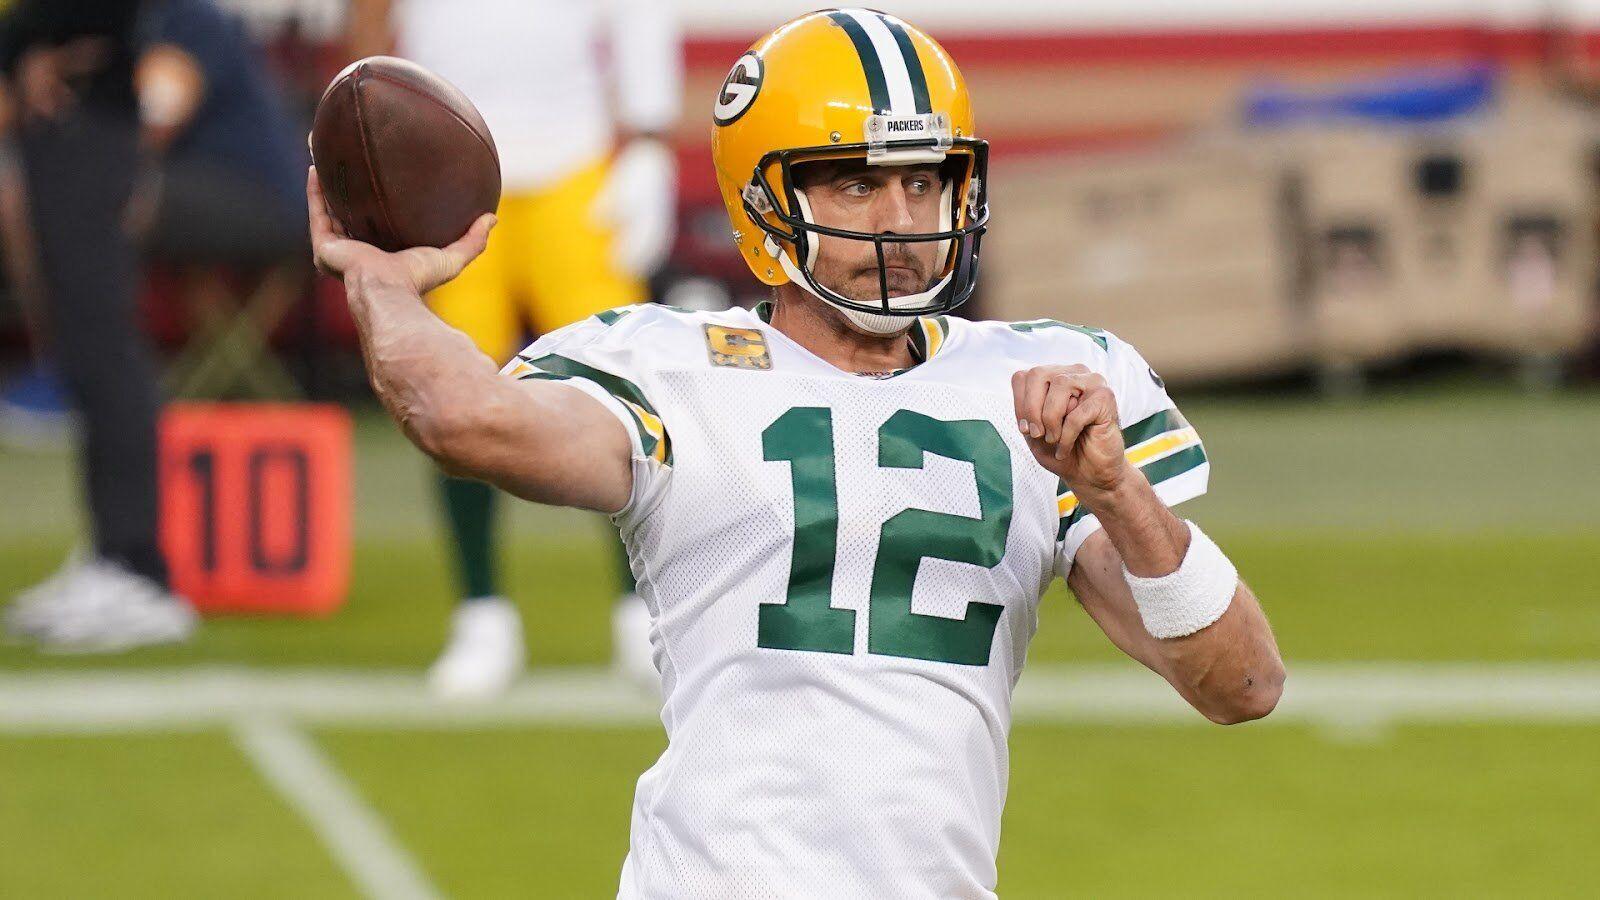 Green Bay QB Aaron Rodgers Trade to Denver Broncos 'Close to Done Deal':  Denver Sports Radio Host